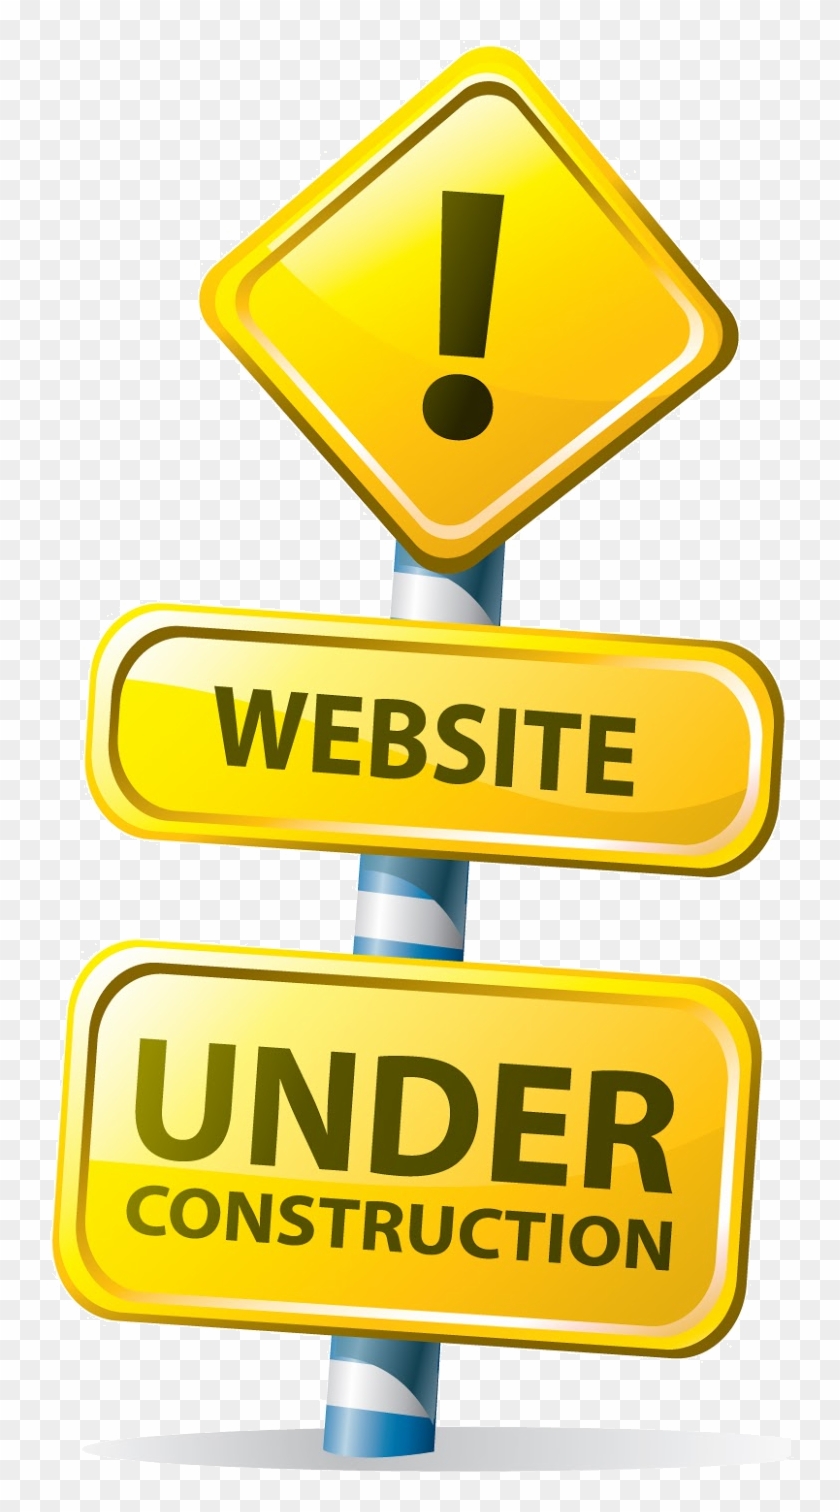 Website Under Construction Image Free Clipart #4568056